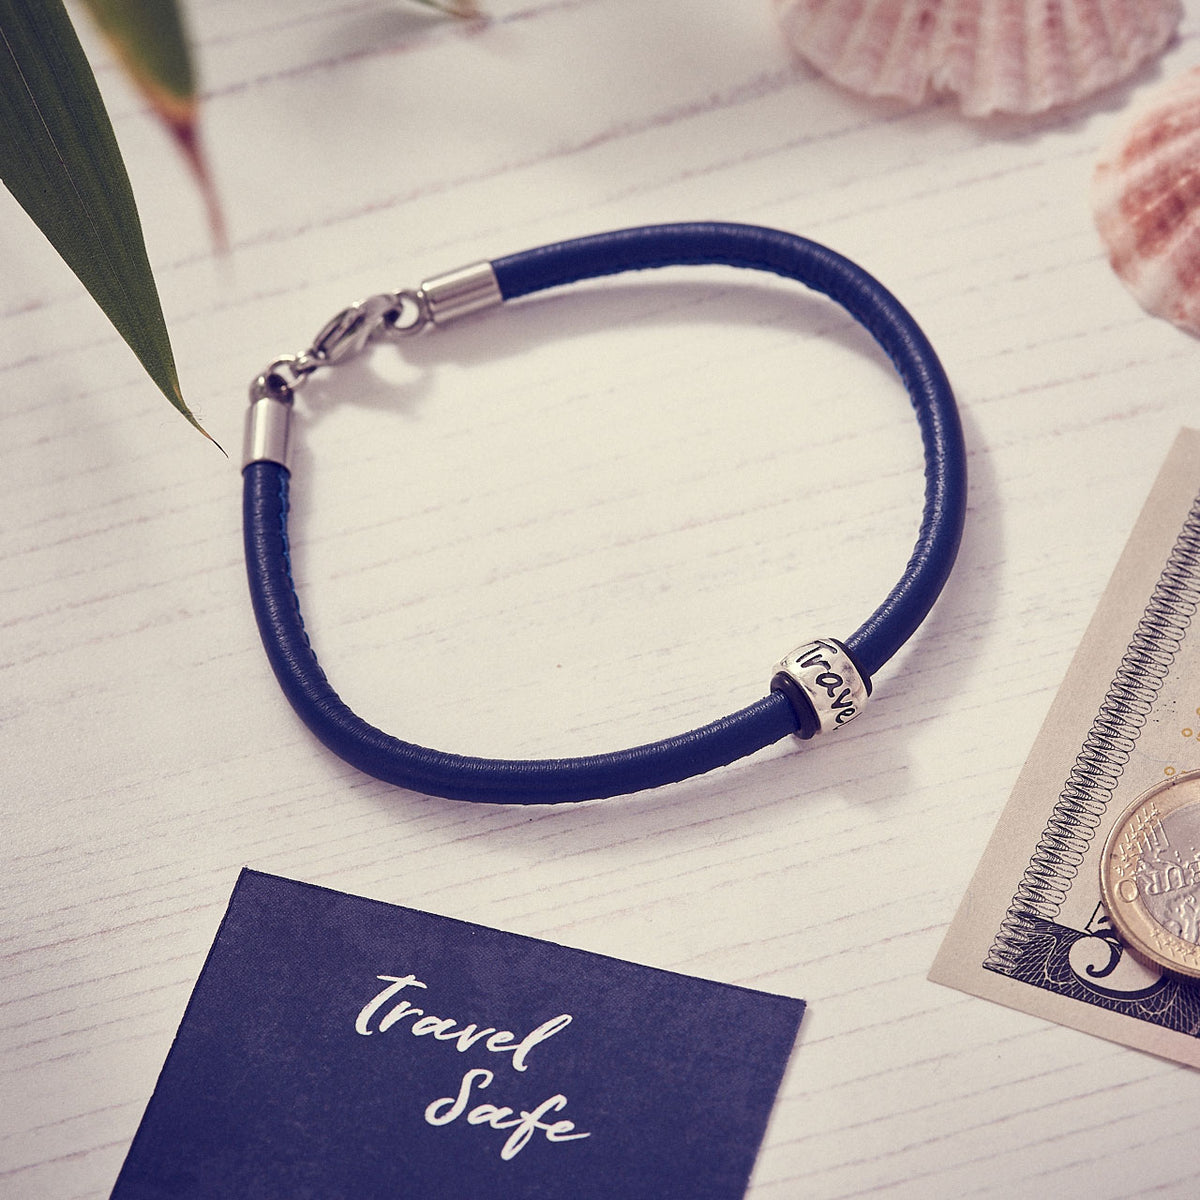 Travel Safe Silver &amp; Italian Stitched Leather Bracelet Navy Blue - alternative travel gift from Off The map Brighton